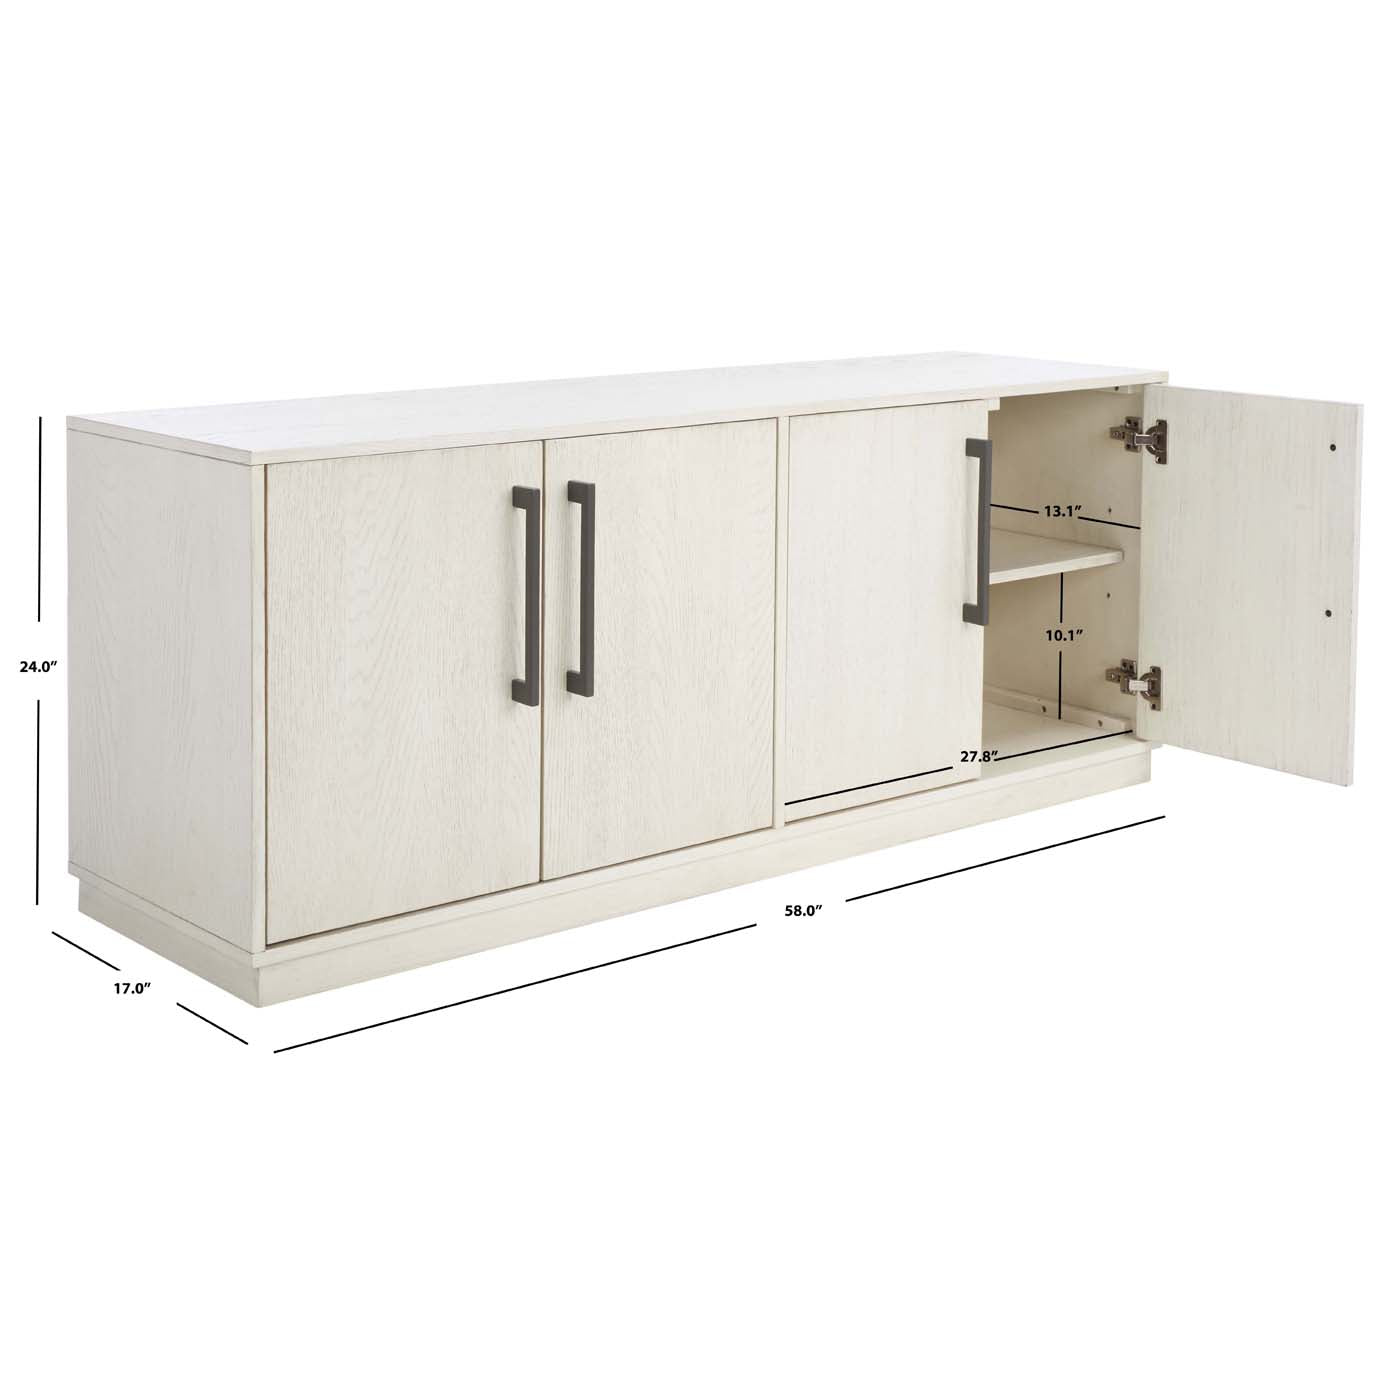 Safavieh Couture Mallory 4 Door Media Stand - White Wash